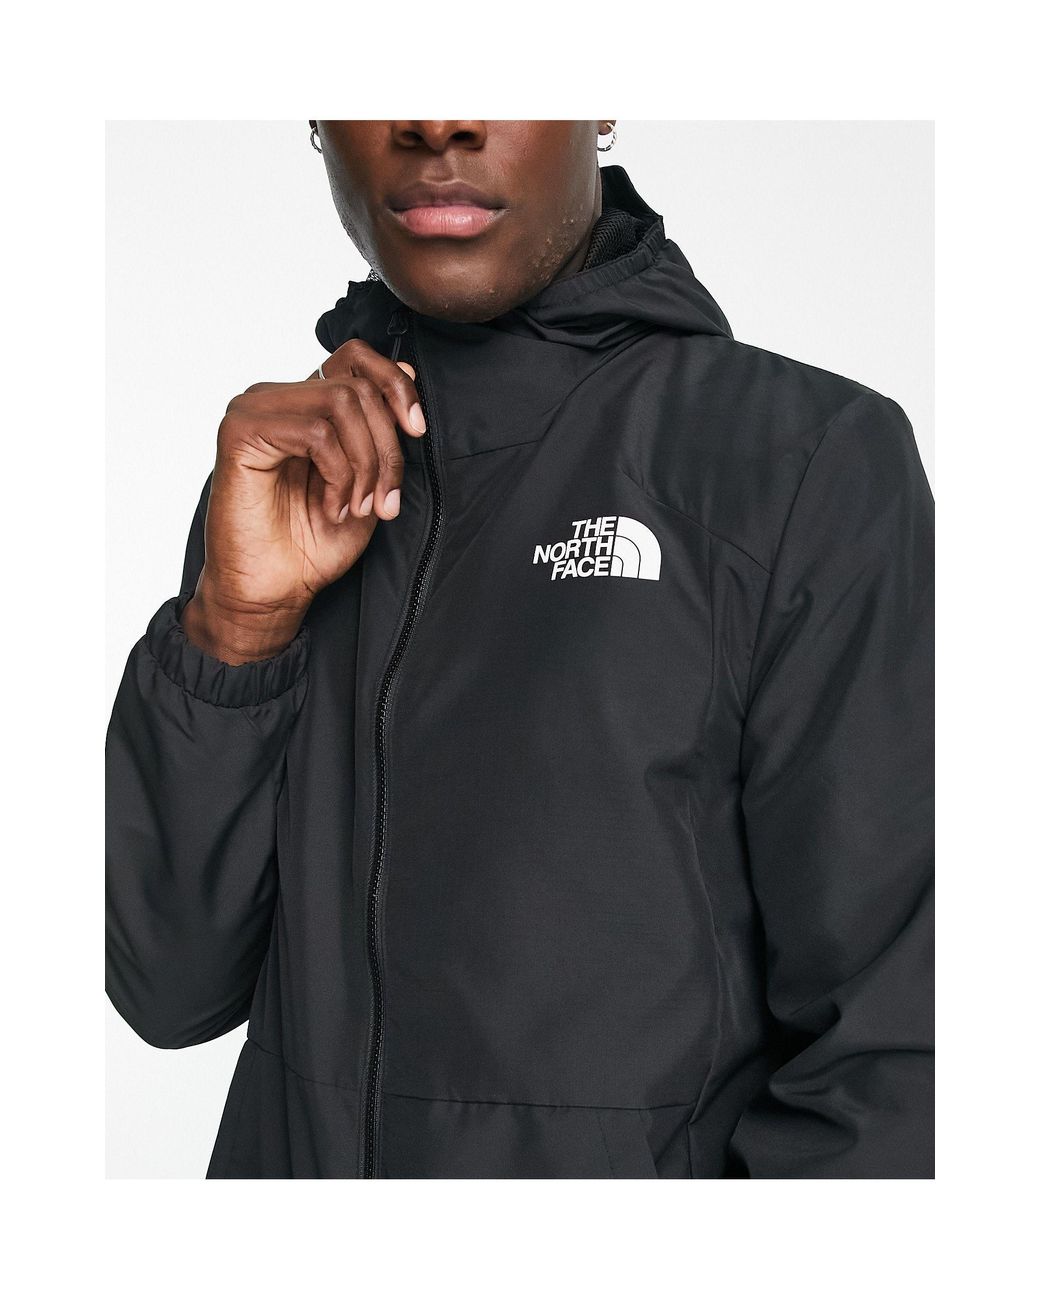 The North Face Mountain Athletics FlashDry wind breaker in gray